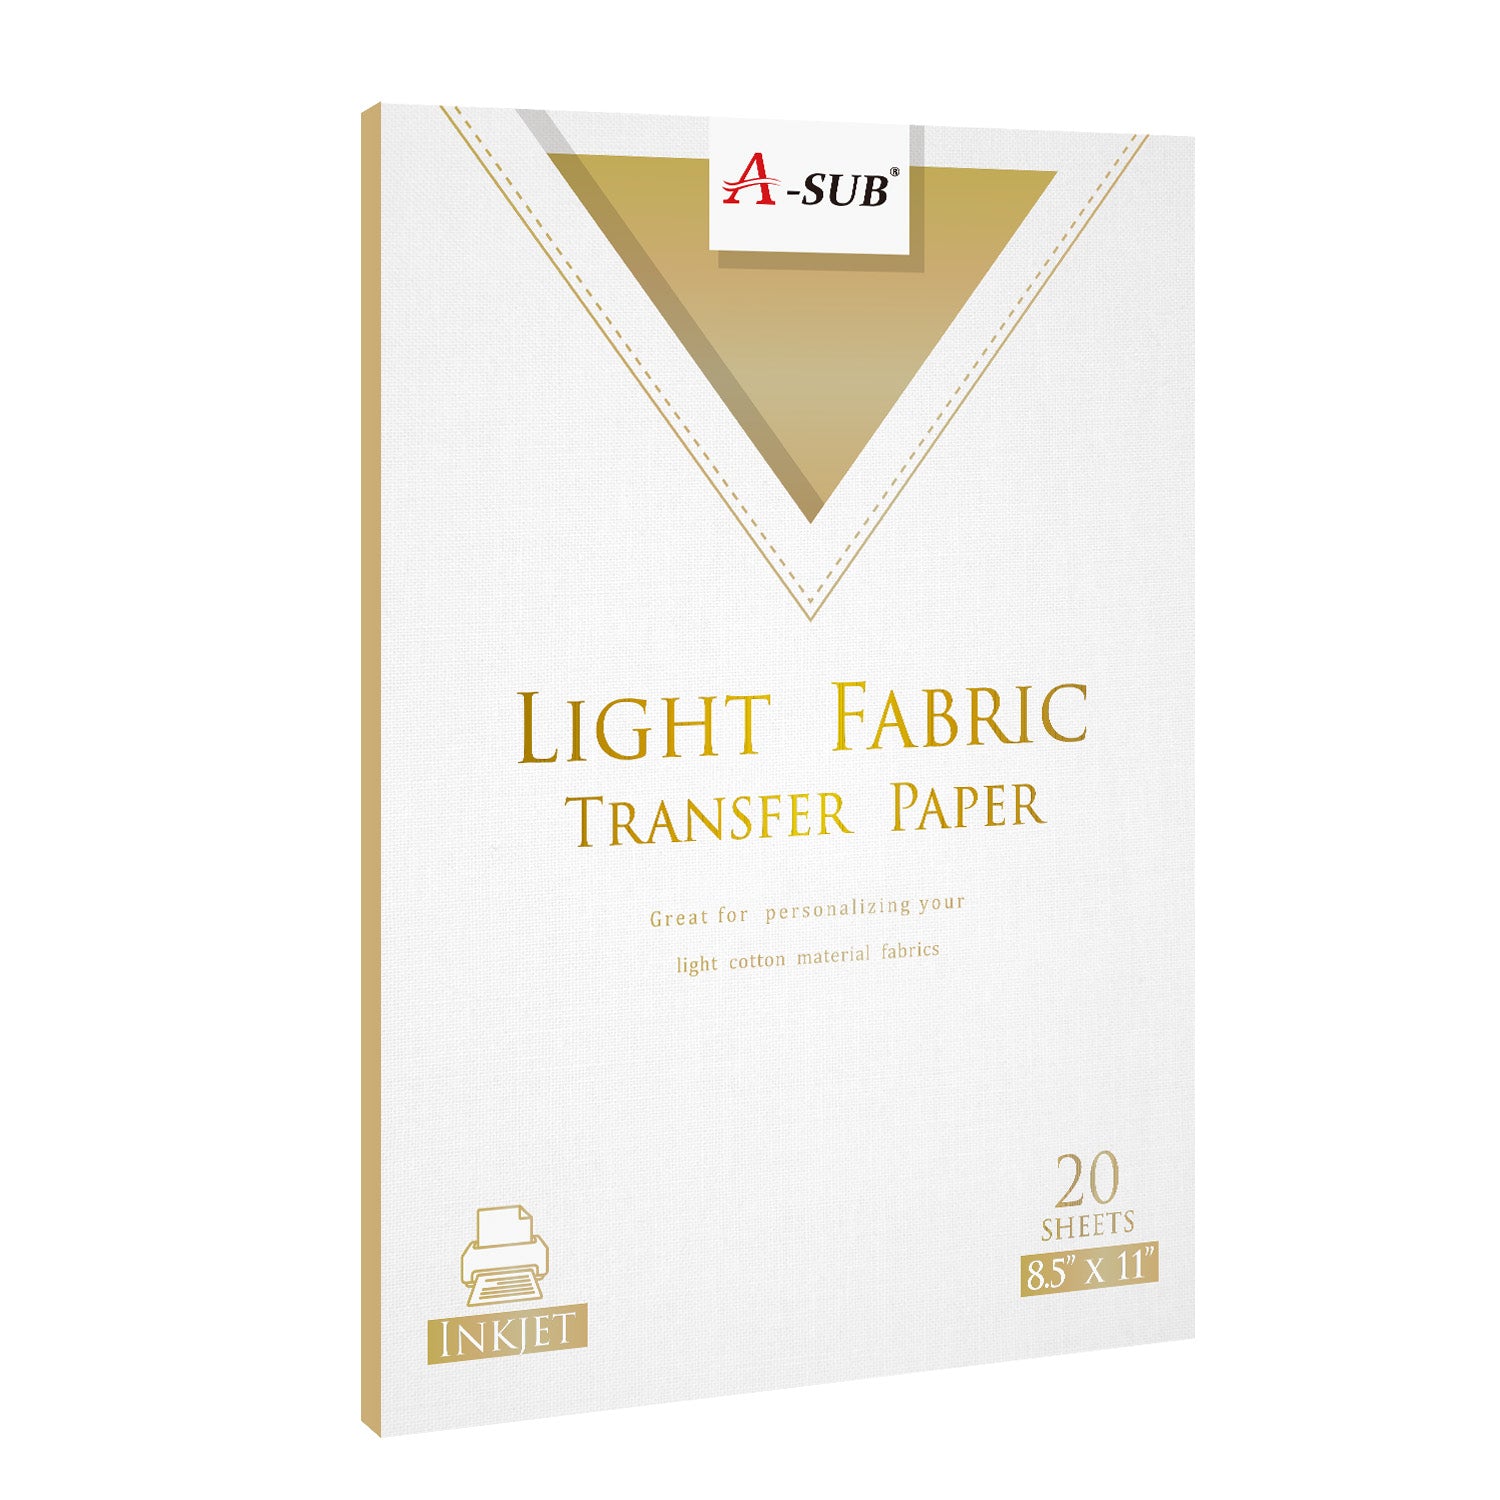 New Inkjet Iron-On Heat Transfer Paper For Dark fabric 20 Sheets 8.5x 11  A4